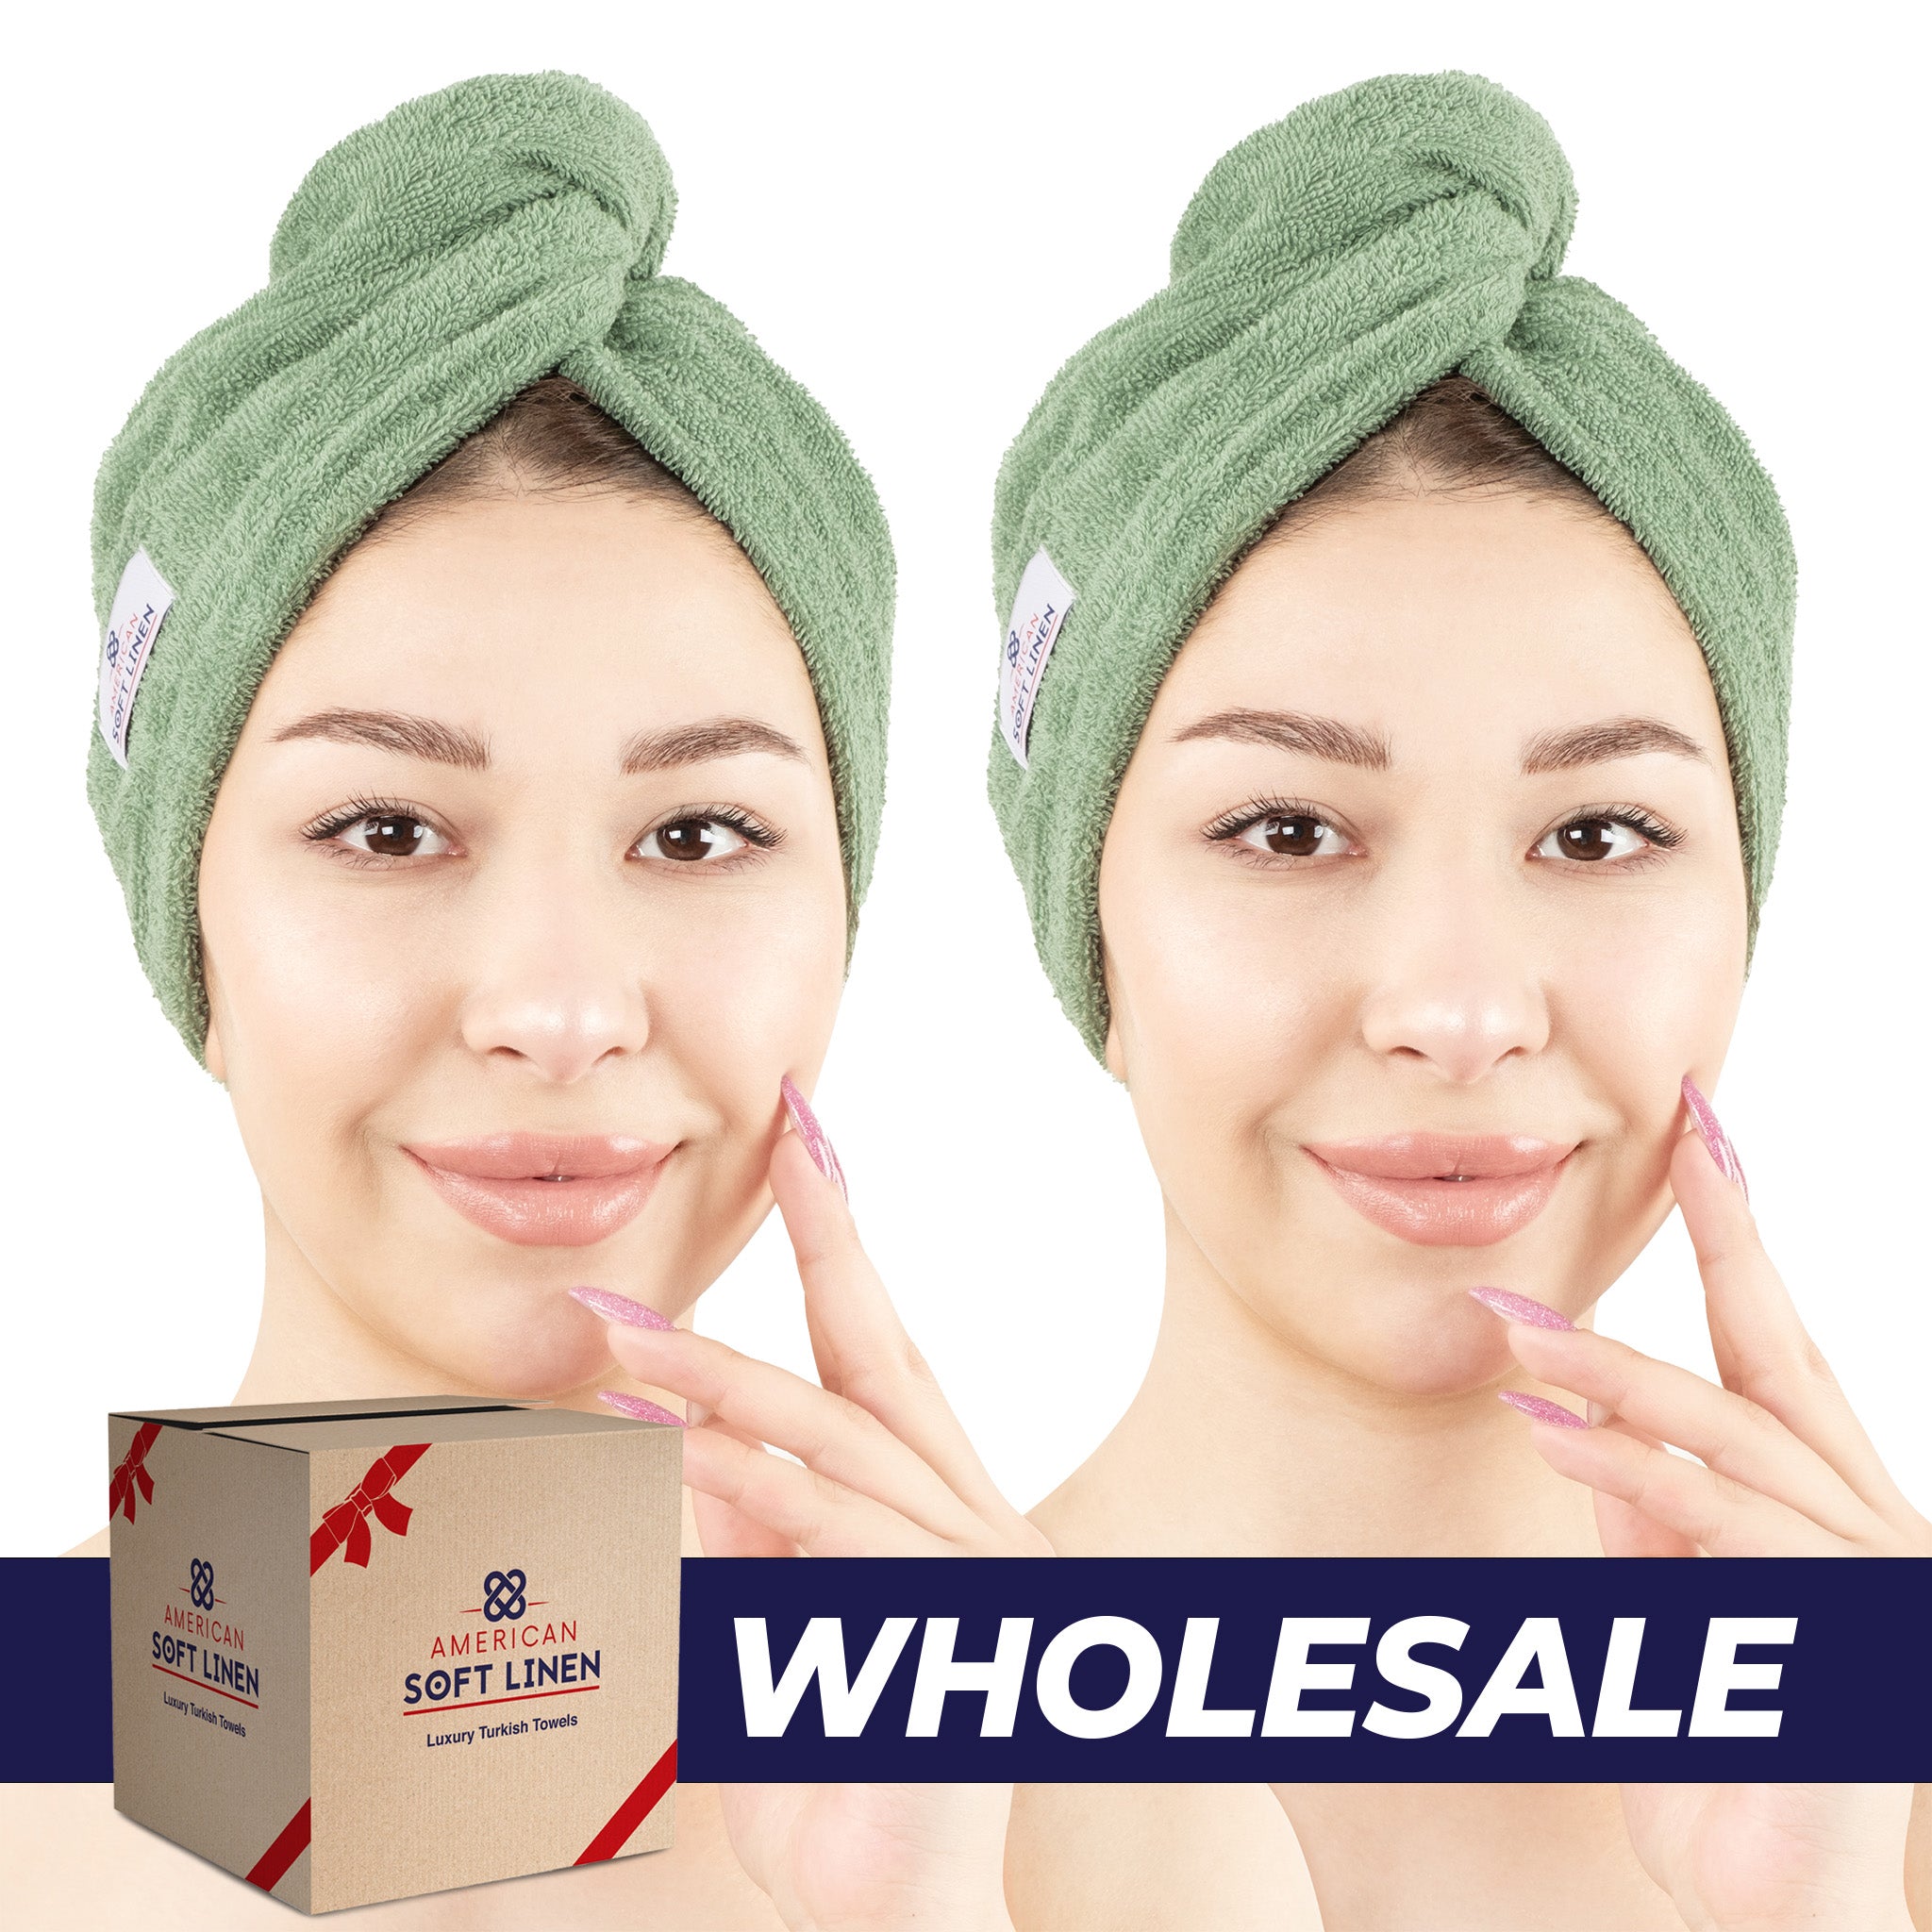 American Soft Linen 100% Cotton Hair Drying Towels for Women 2 pack 75 set case pack sage-green-0